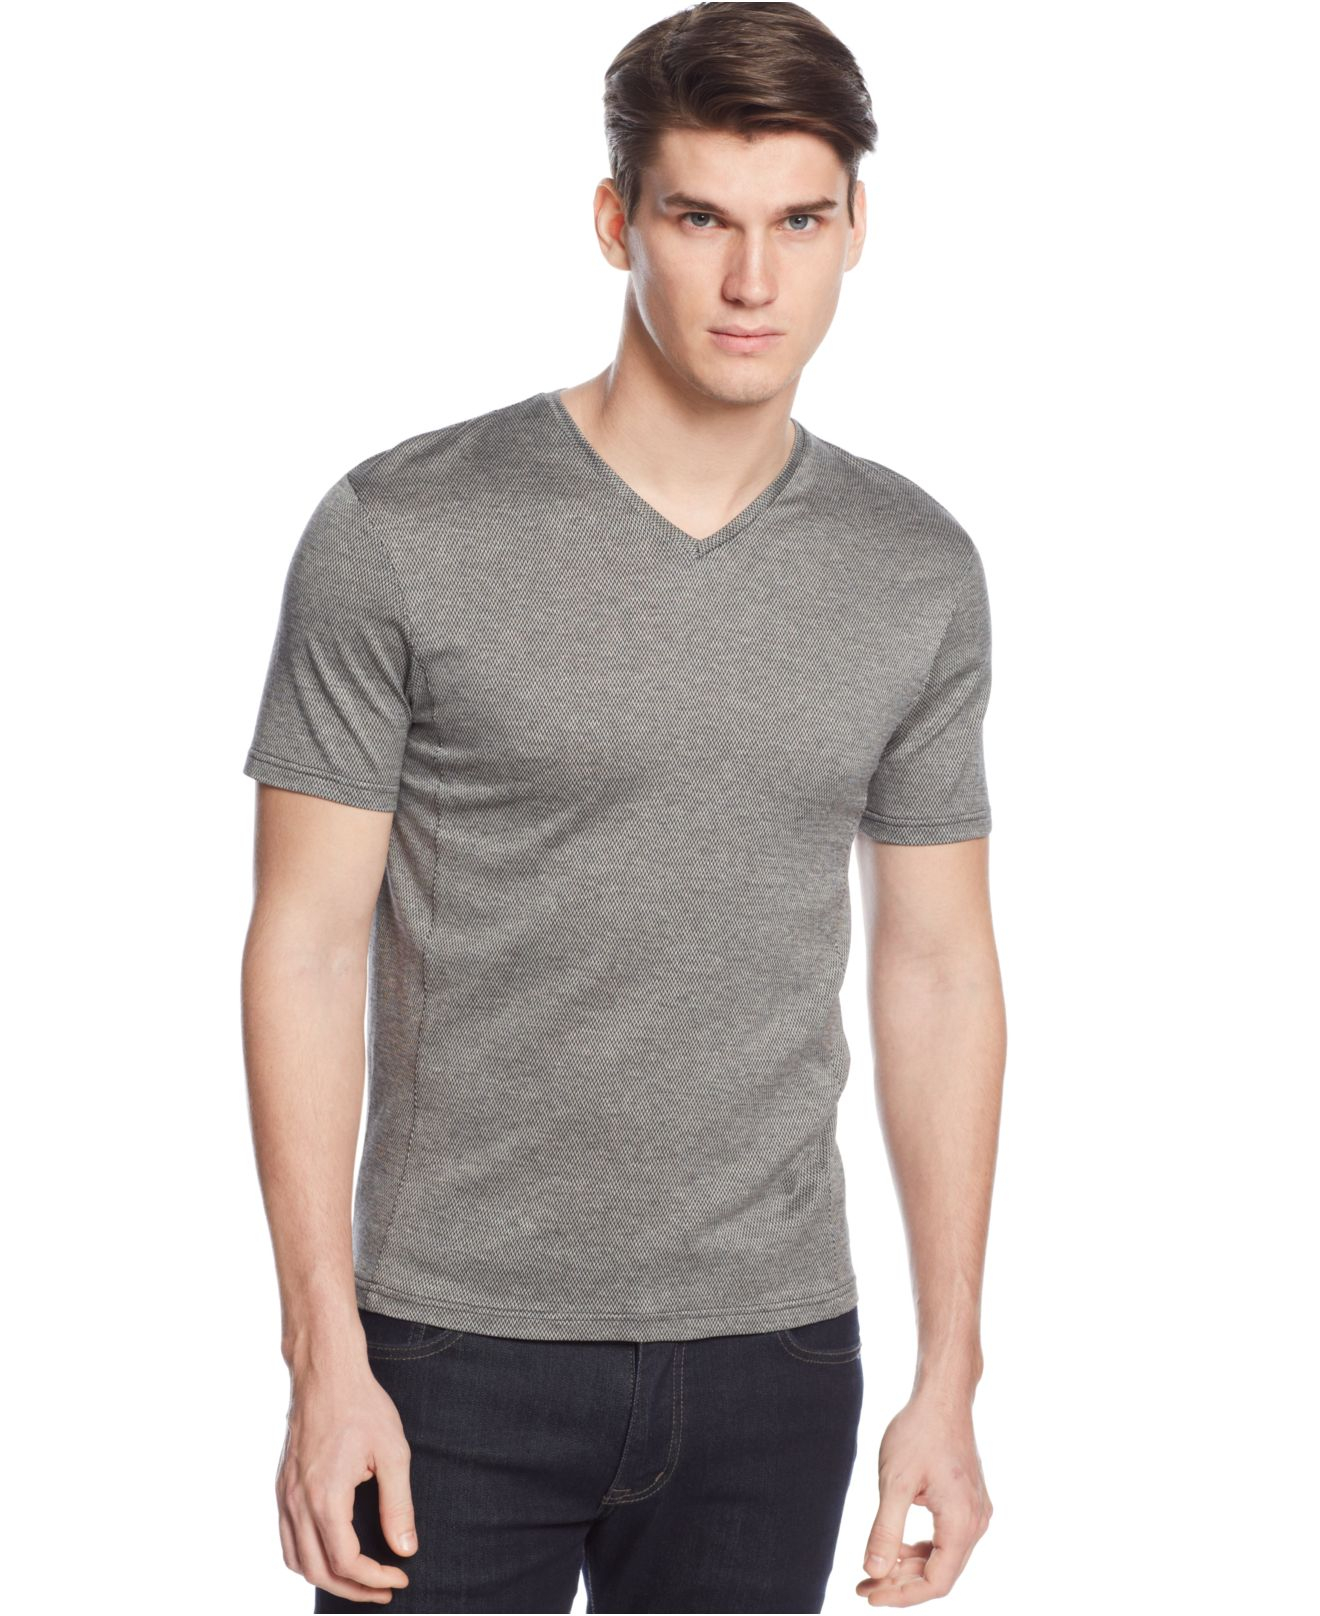 Lyst - Vince Camuto Striped T-Shirt in Blue for Men